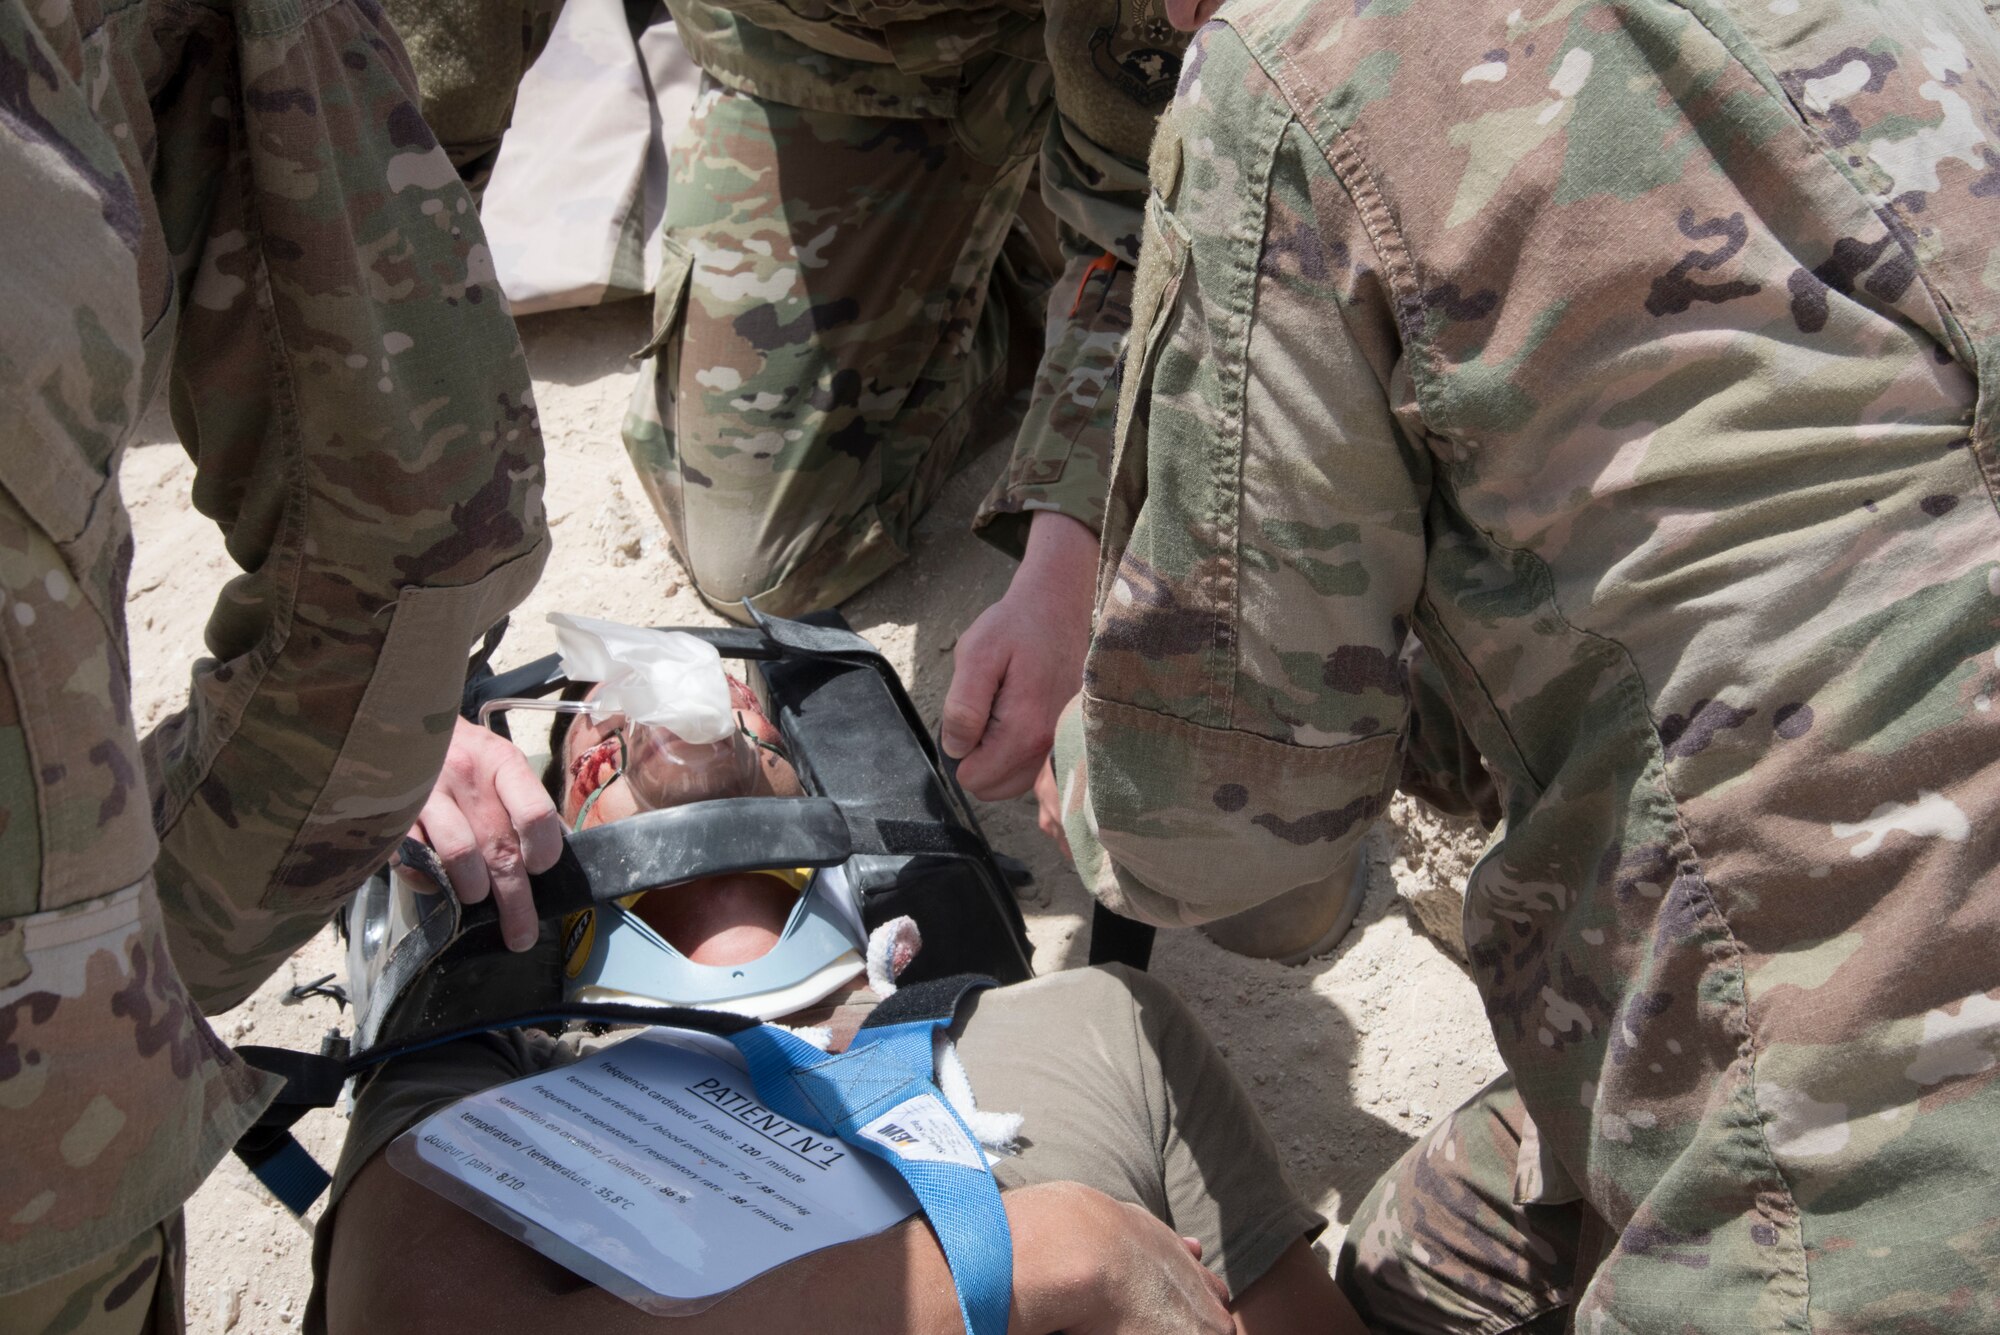 A role player simulating an injured pilot is loaded onto a stretcher during a joint agency exercise here, May 2. (U.S. Air National Guard photo by Staff Sgt. Erica Rodriguez)